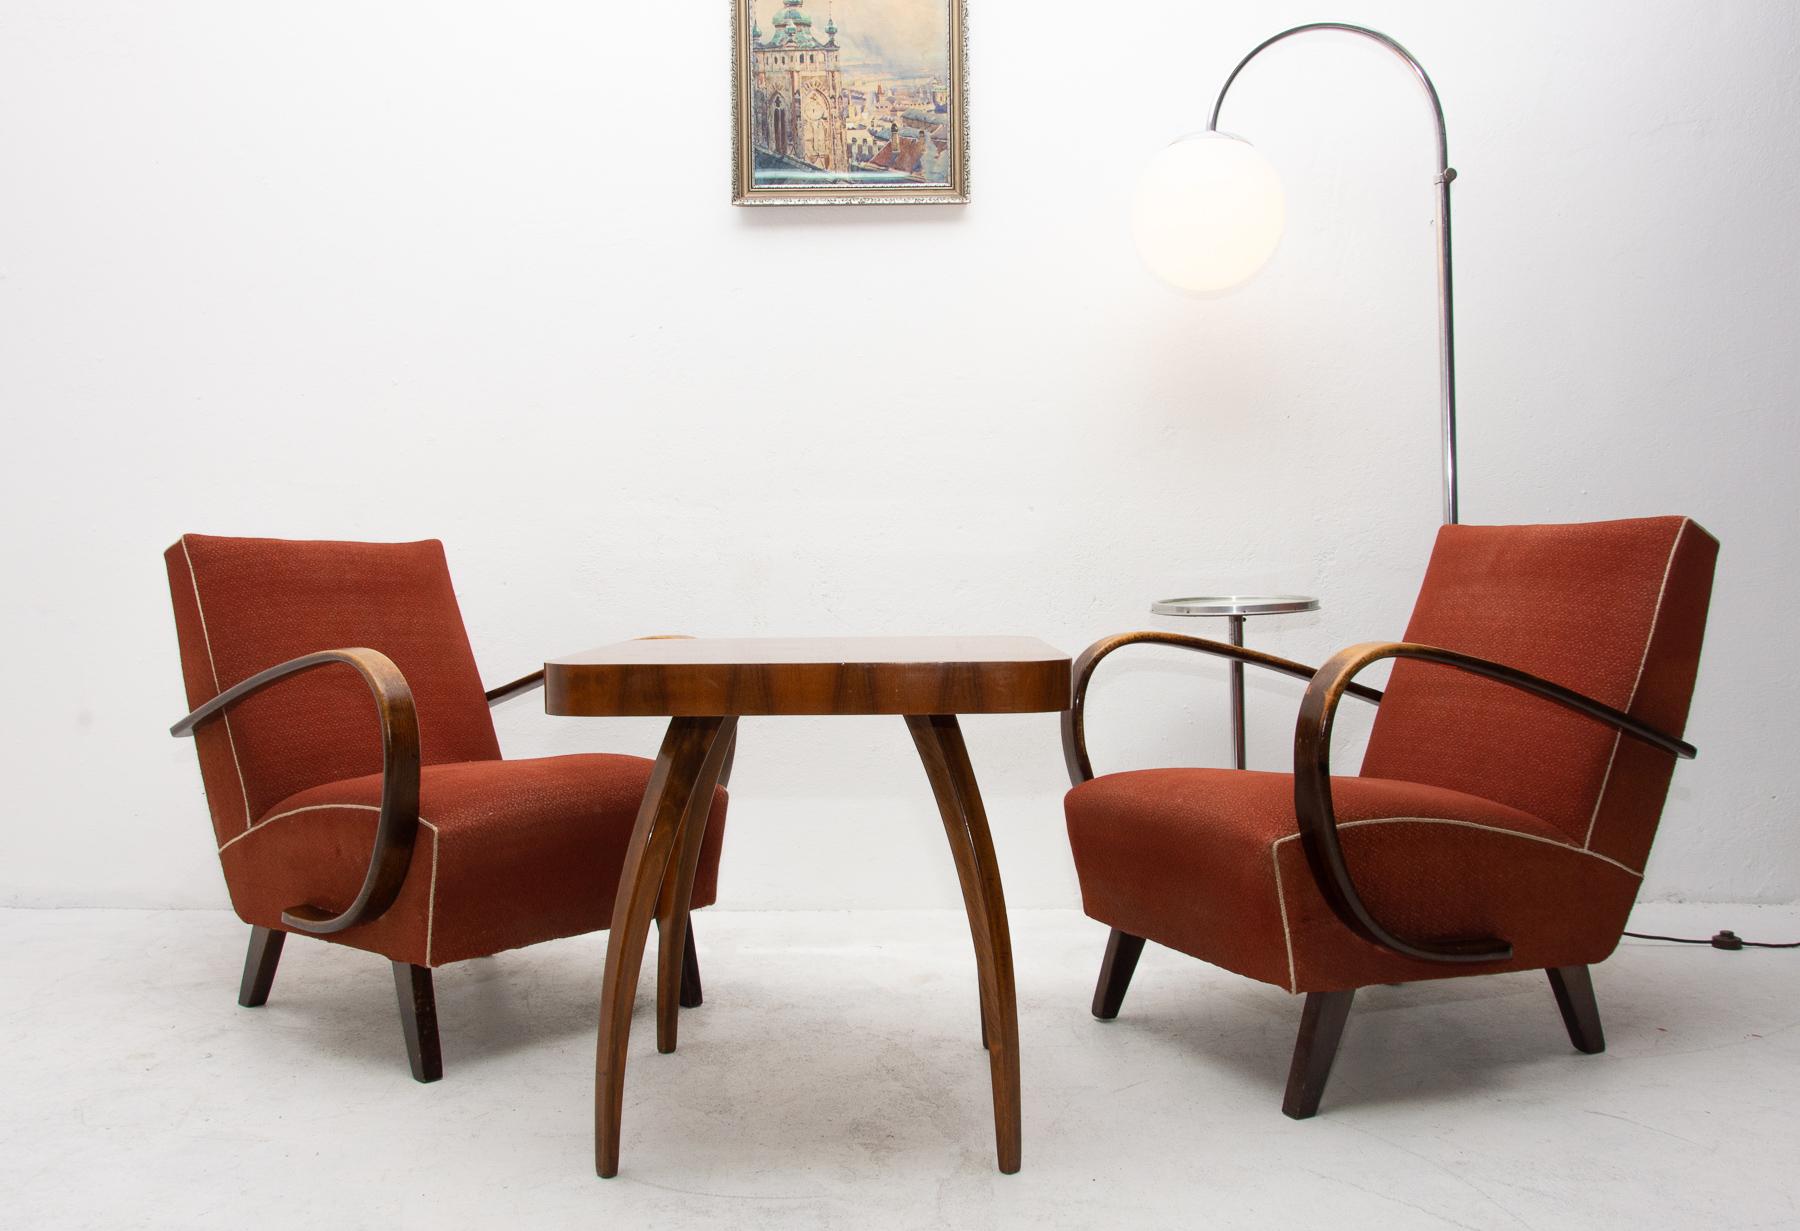 This pair of bentwood armchairs “C” was designed by Jindrich Halabala and produced by UP Závody in the 1950s. The chairs are in very good Vintage condition, bears signs of age and using. Price is for the pair.

Measures: Height 79 cm, width 69 cm,